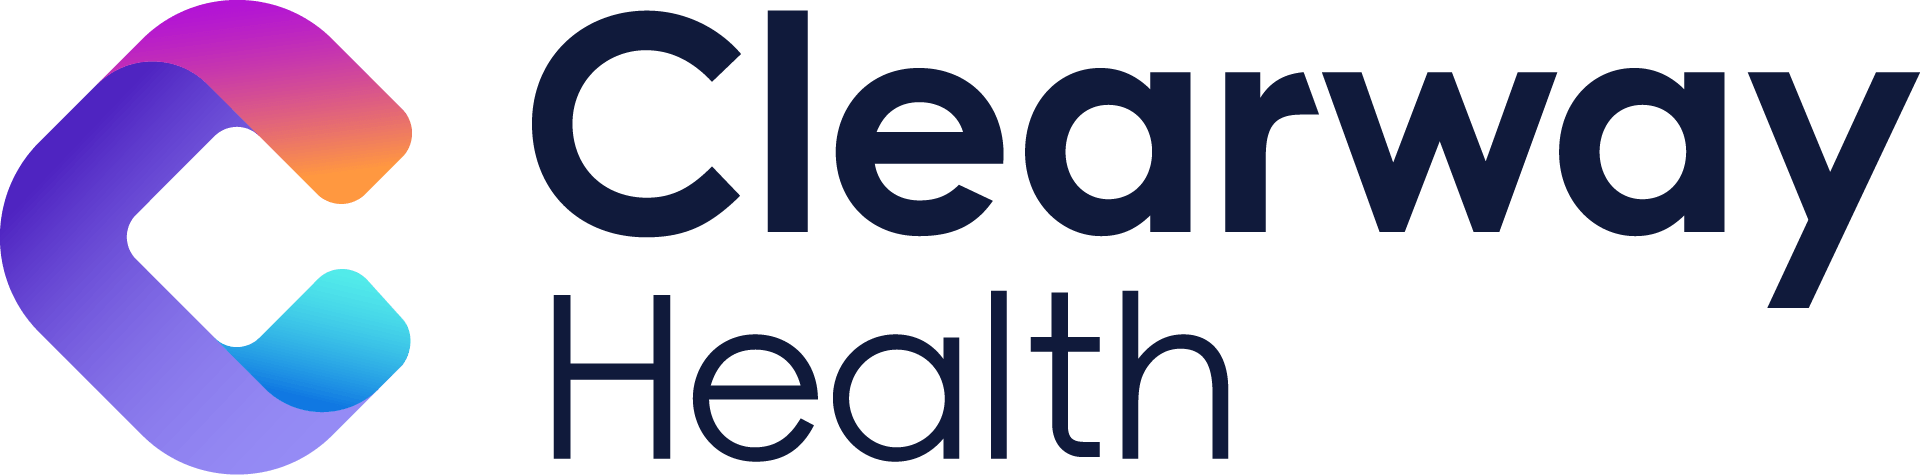 Clearway Health